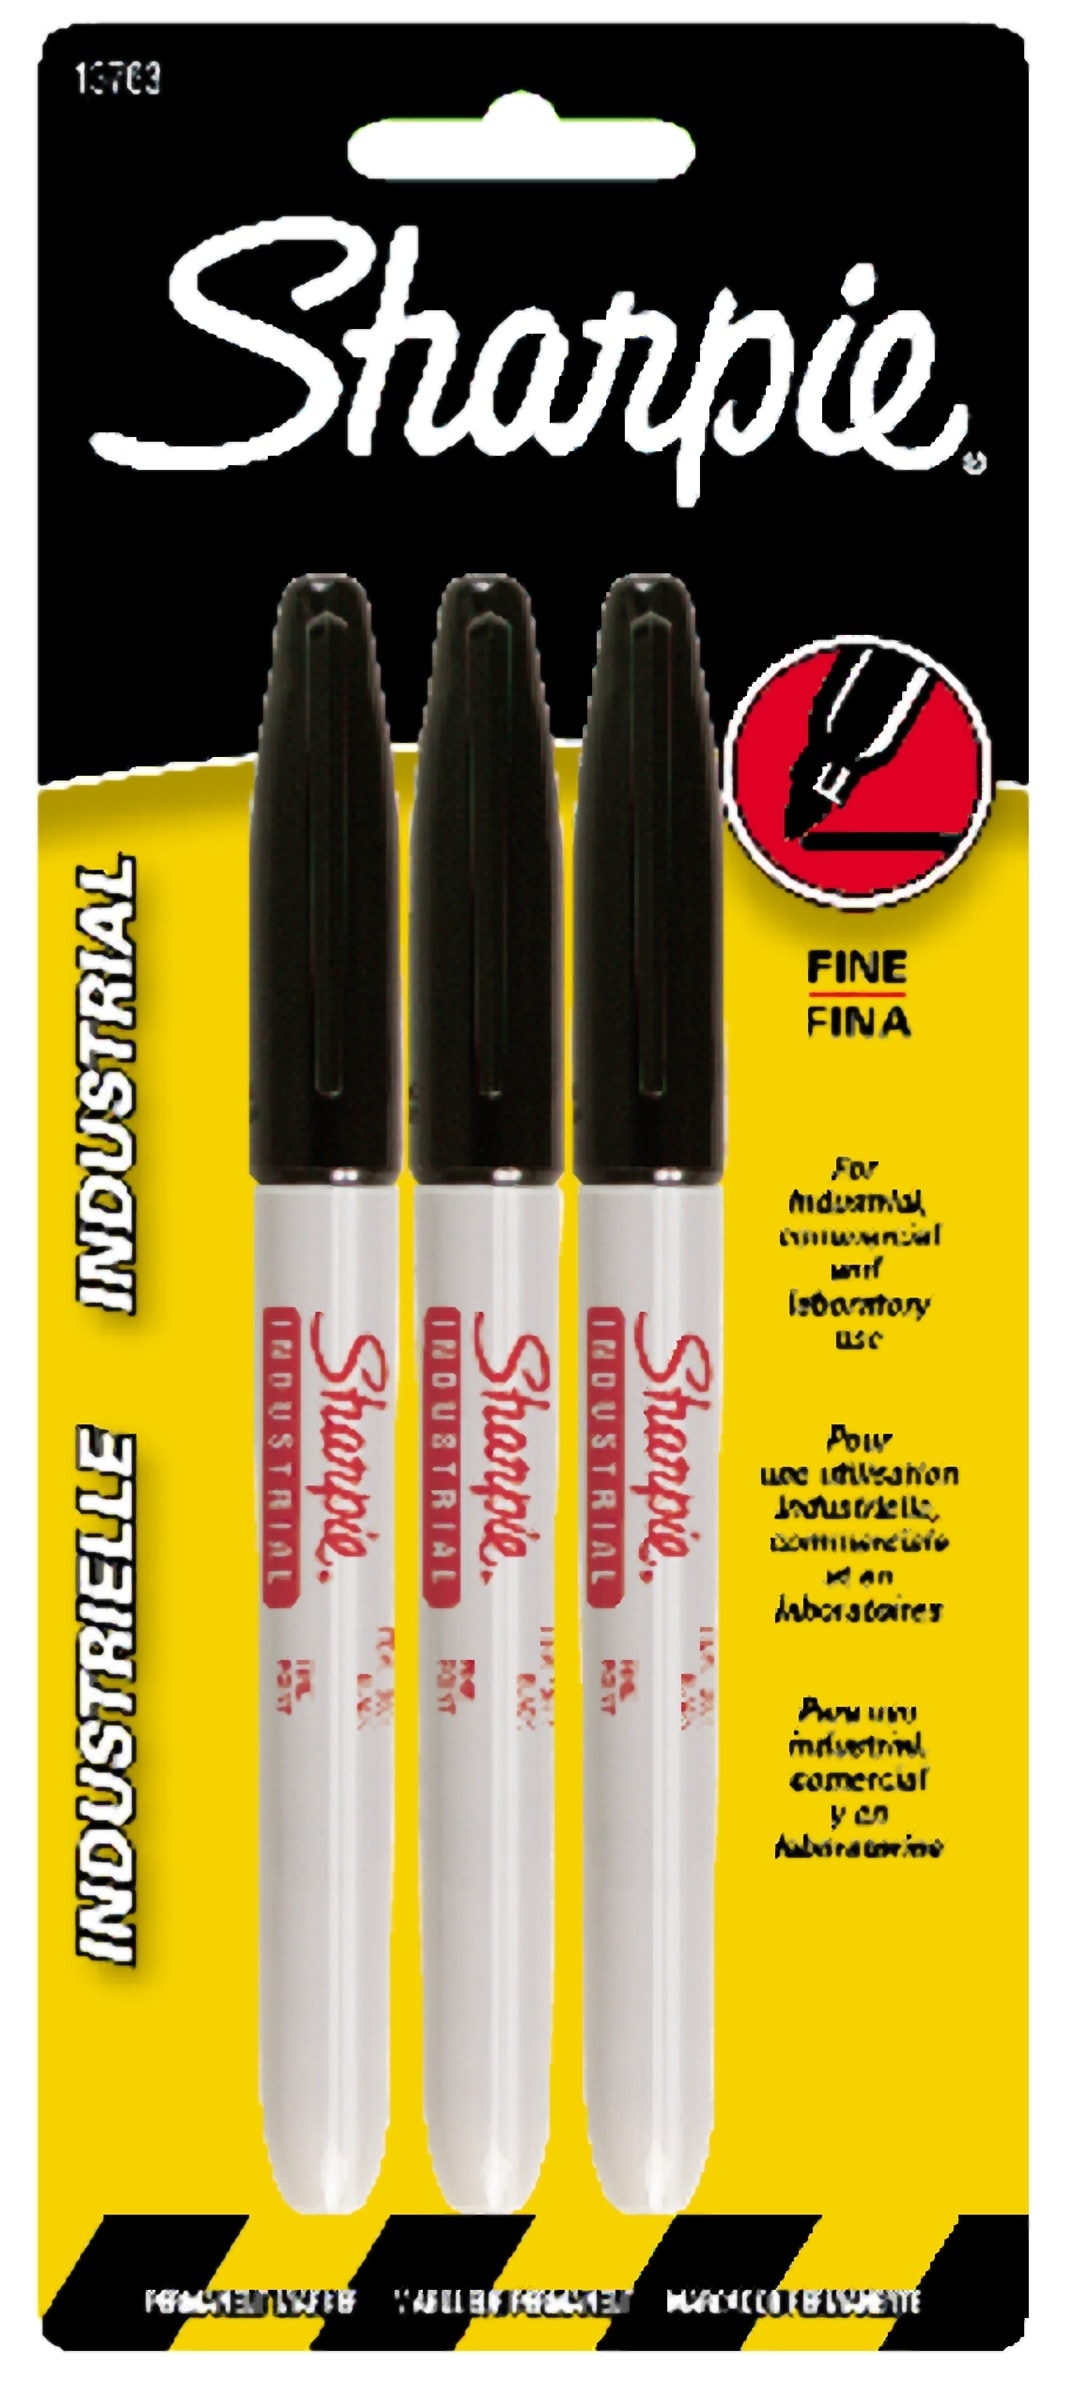 School Smart Fine Tip Permanent Markers, Quick-Drying and Water Resistant,  1 mm Tip, Black, Pack of 48